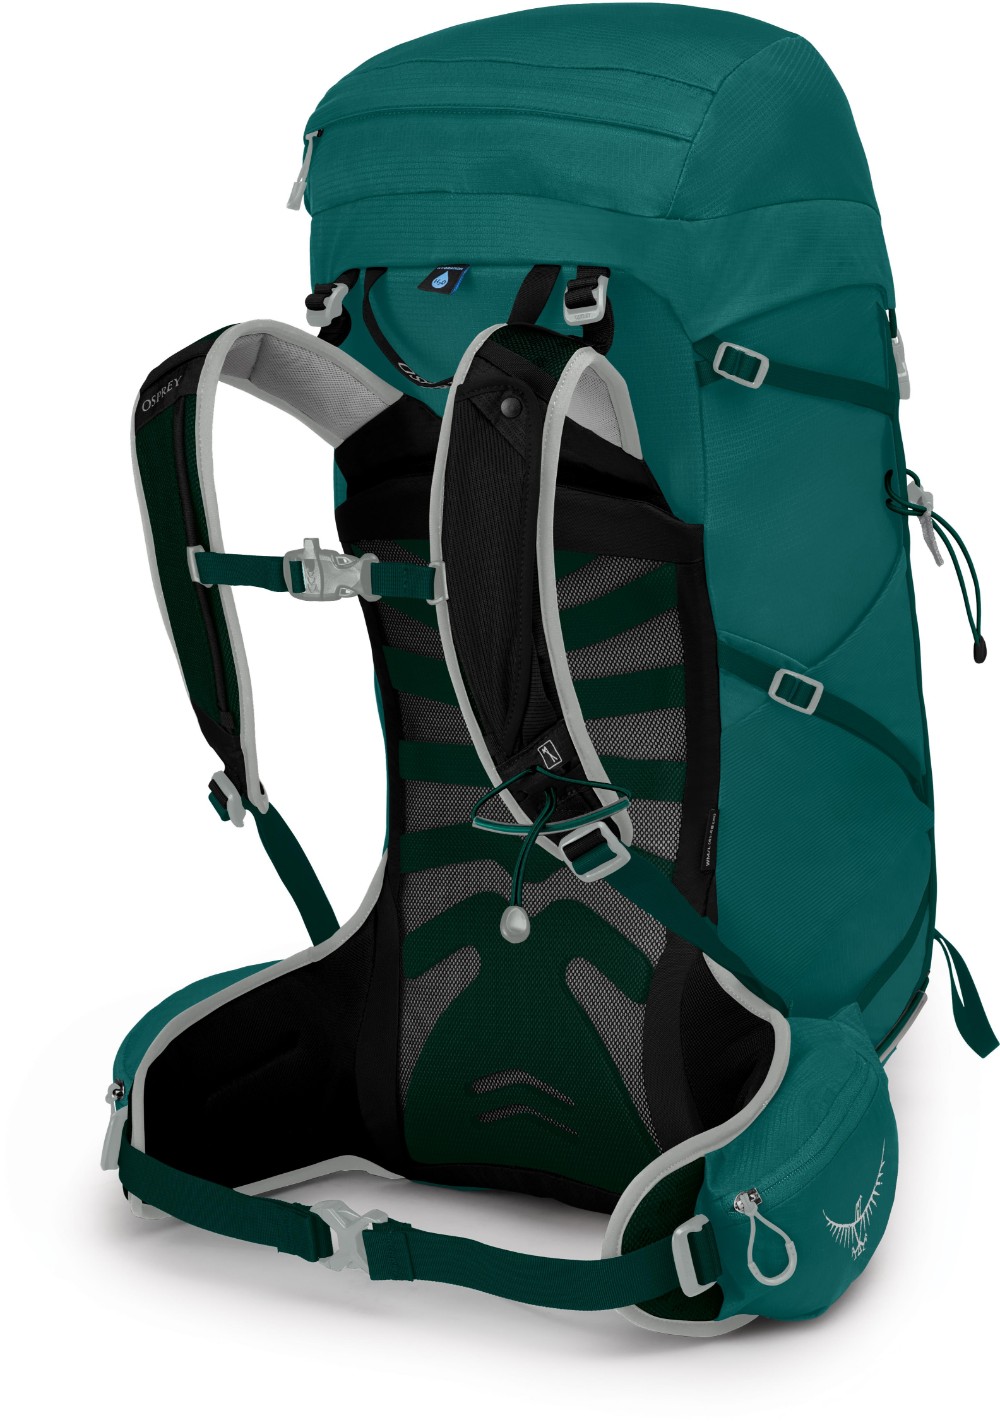 Tempest 30 Womens Hiking Backpack image 1